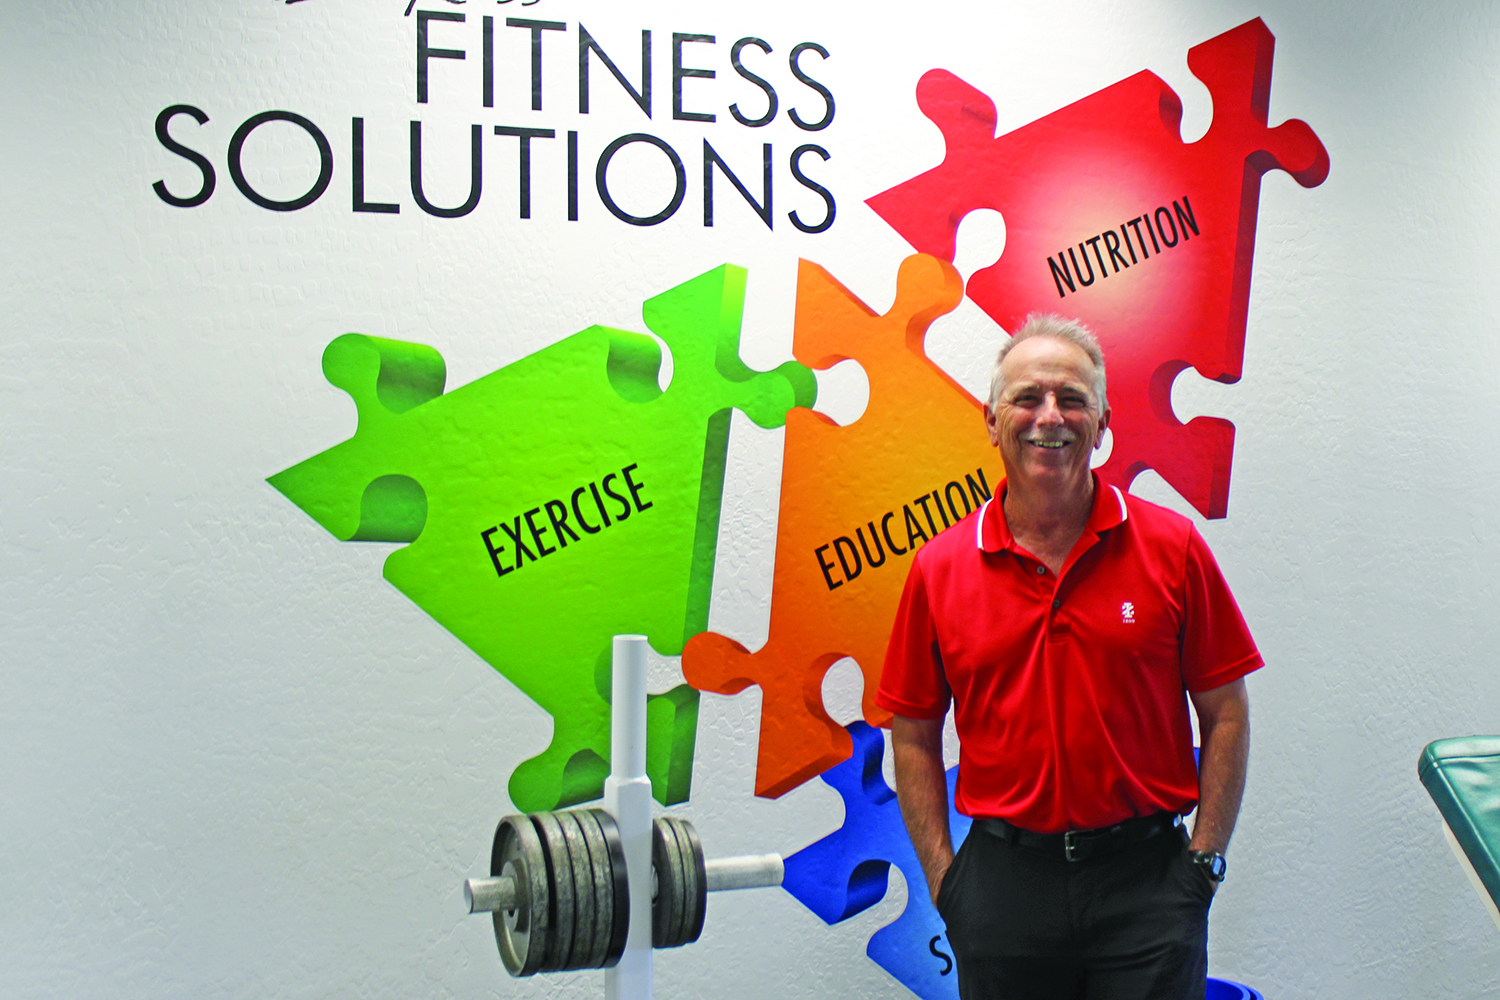 Free seminar offers health and fitness tips